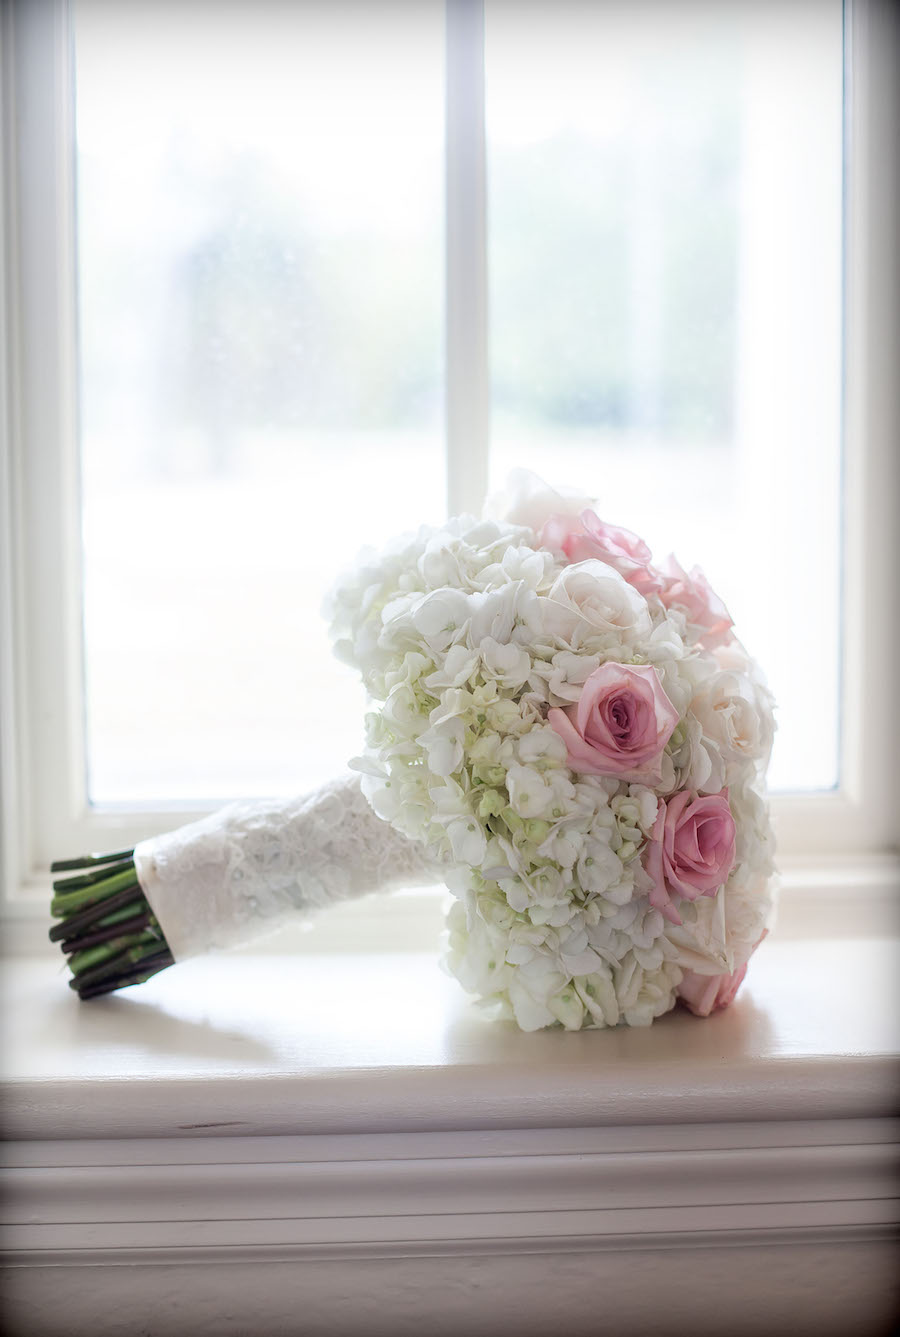 Ivory Hydrangeas and and Pink Rose Bridal Wedding Bouquet of Flowers